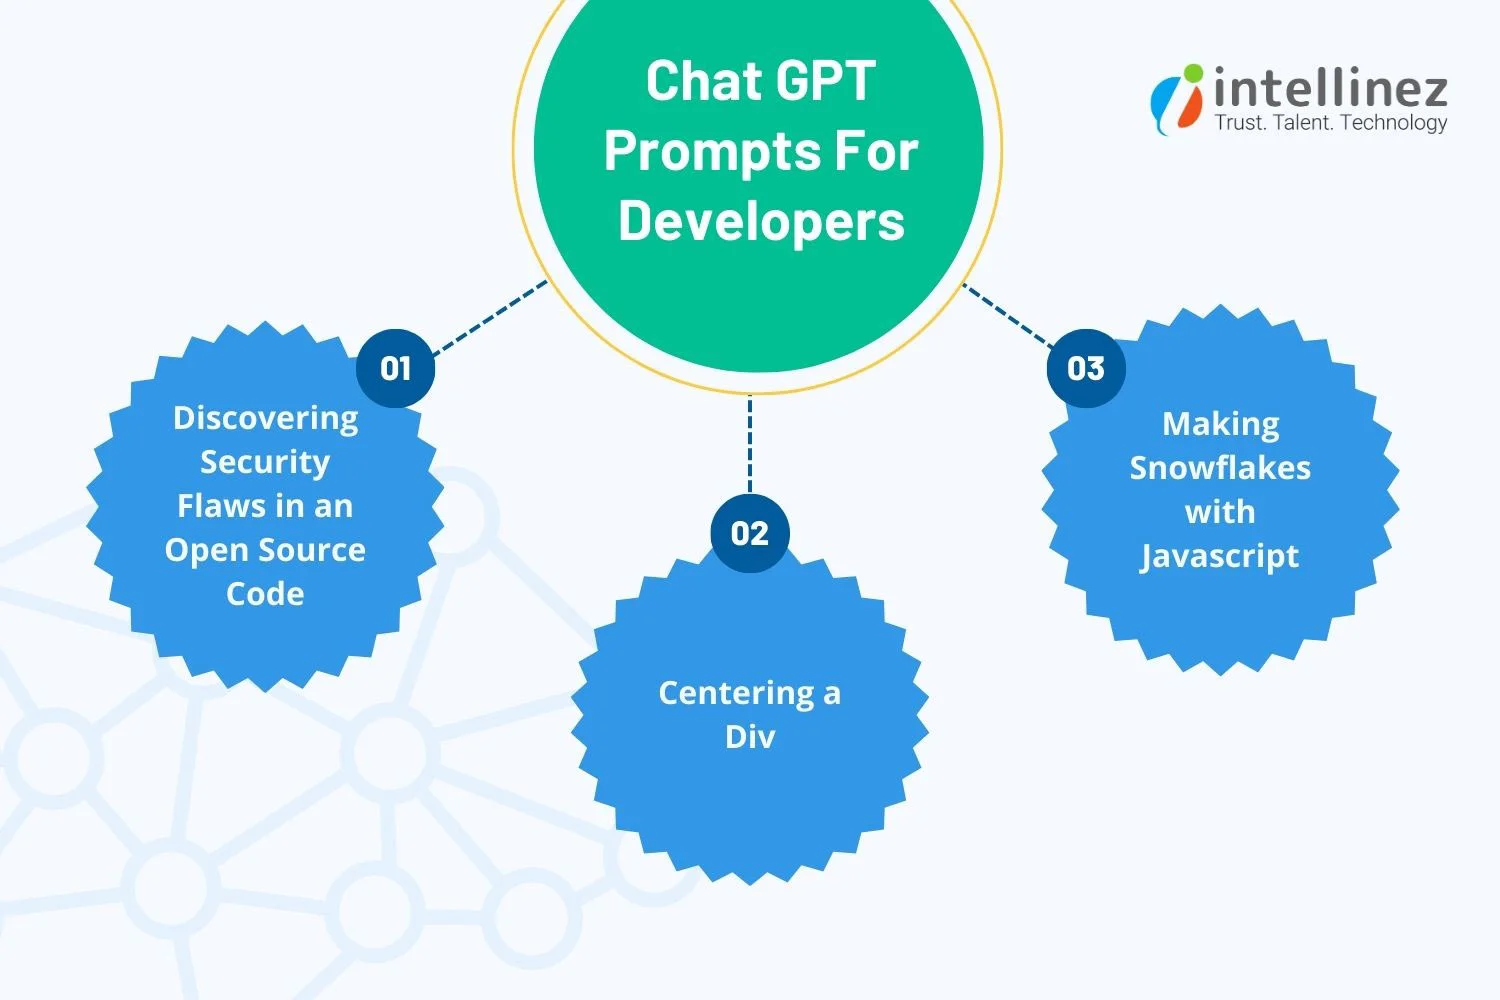 ChatGPT Prompts For Developers